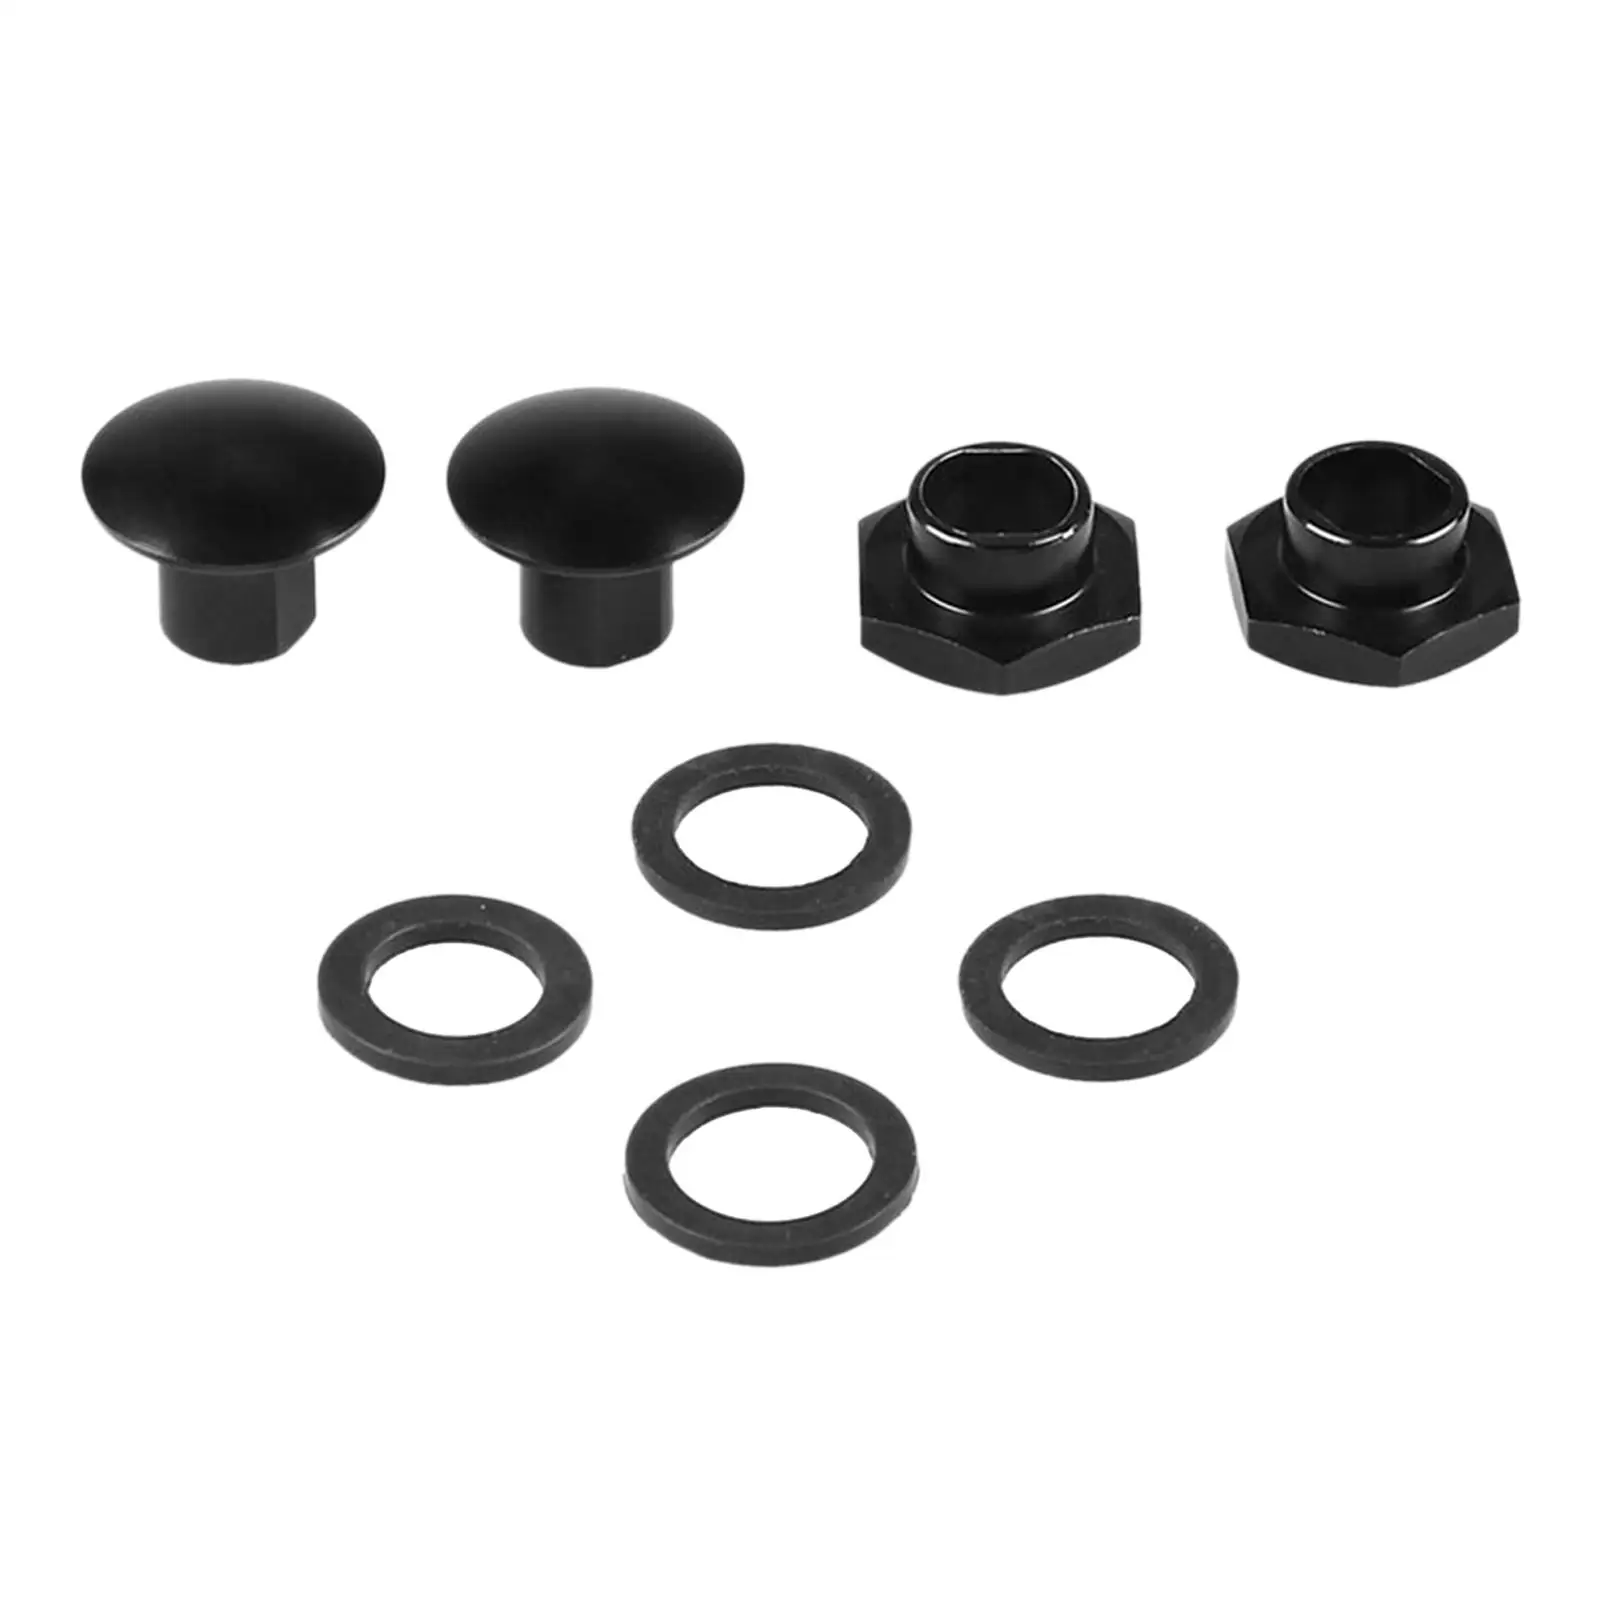 Rear Glass Strut Hardware Kit Fit for Honda Civic 3DR Replaces Professional